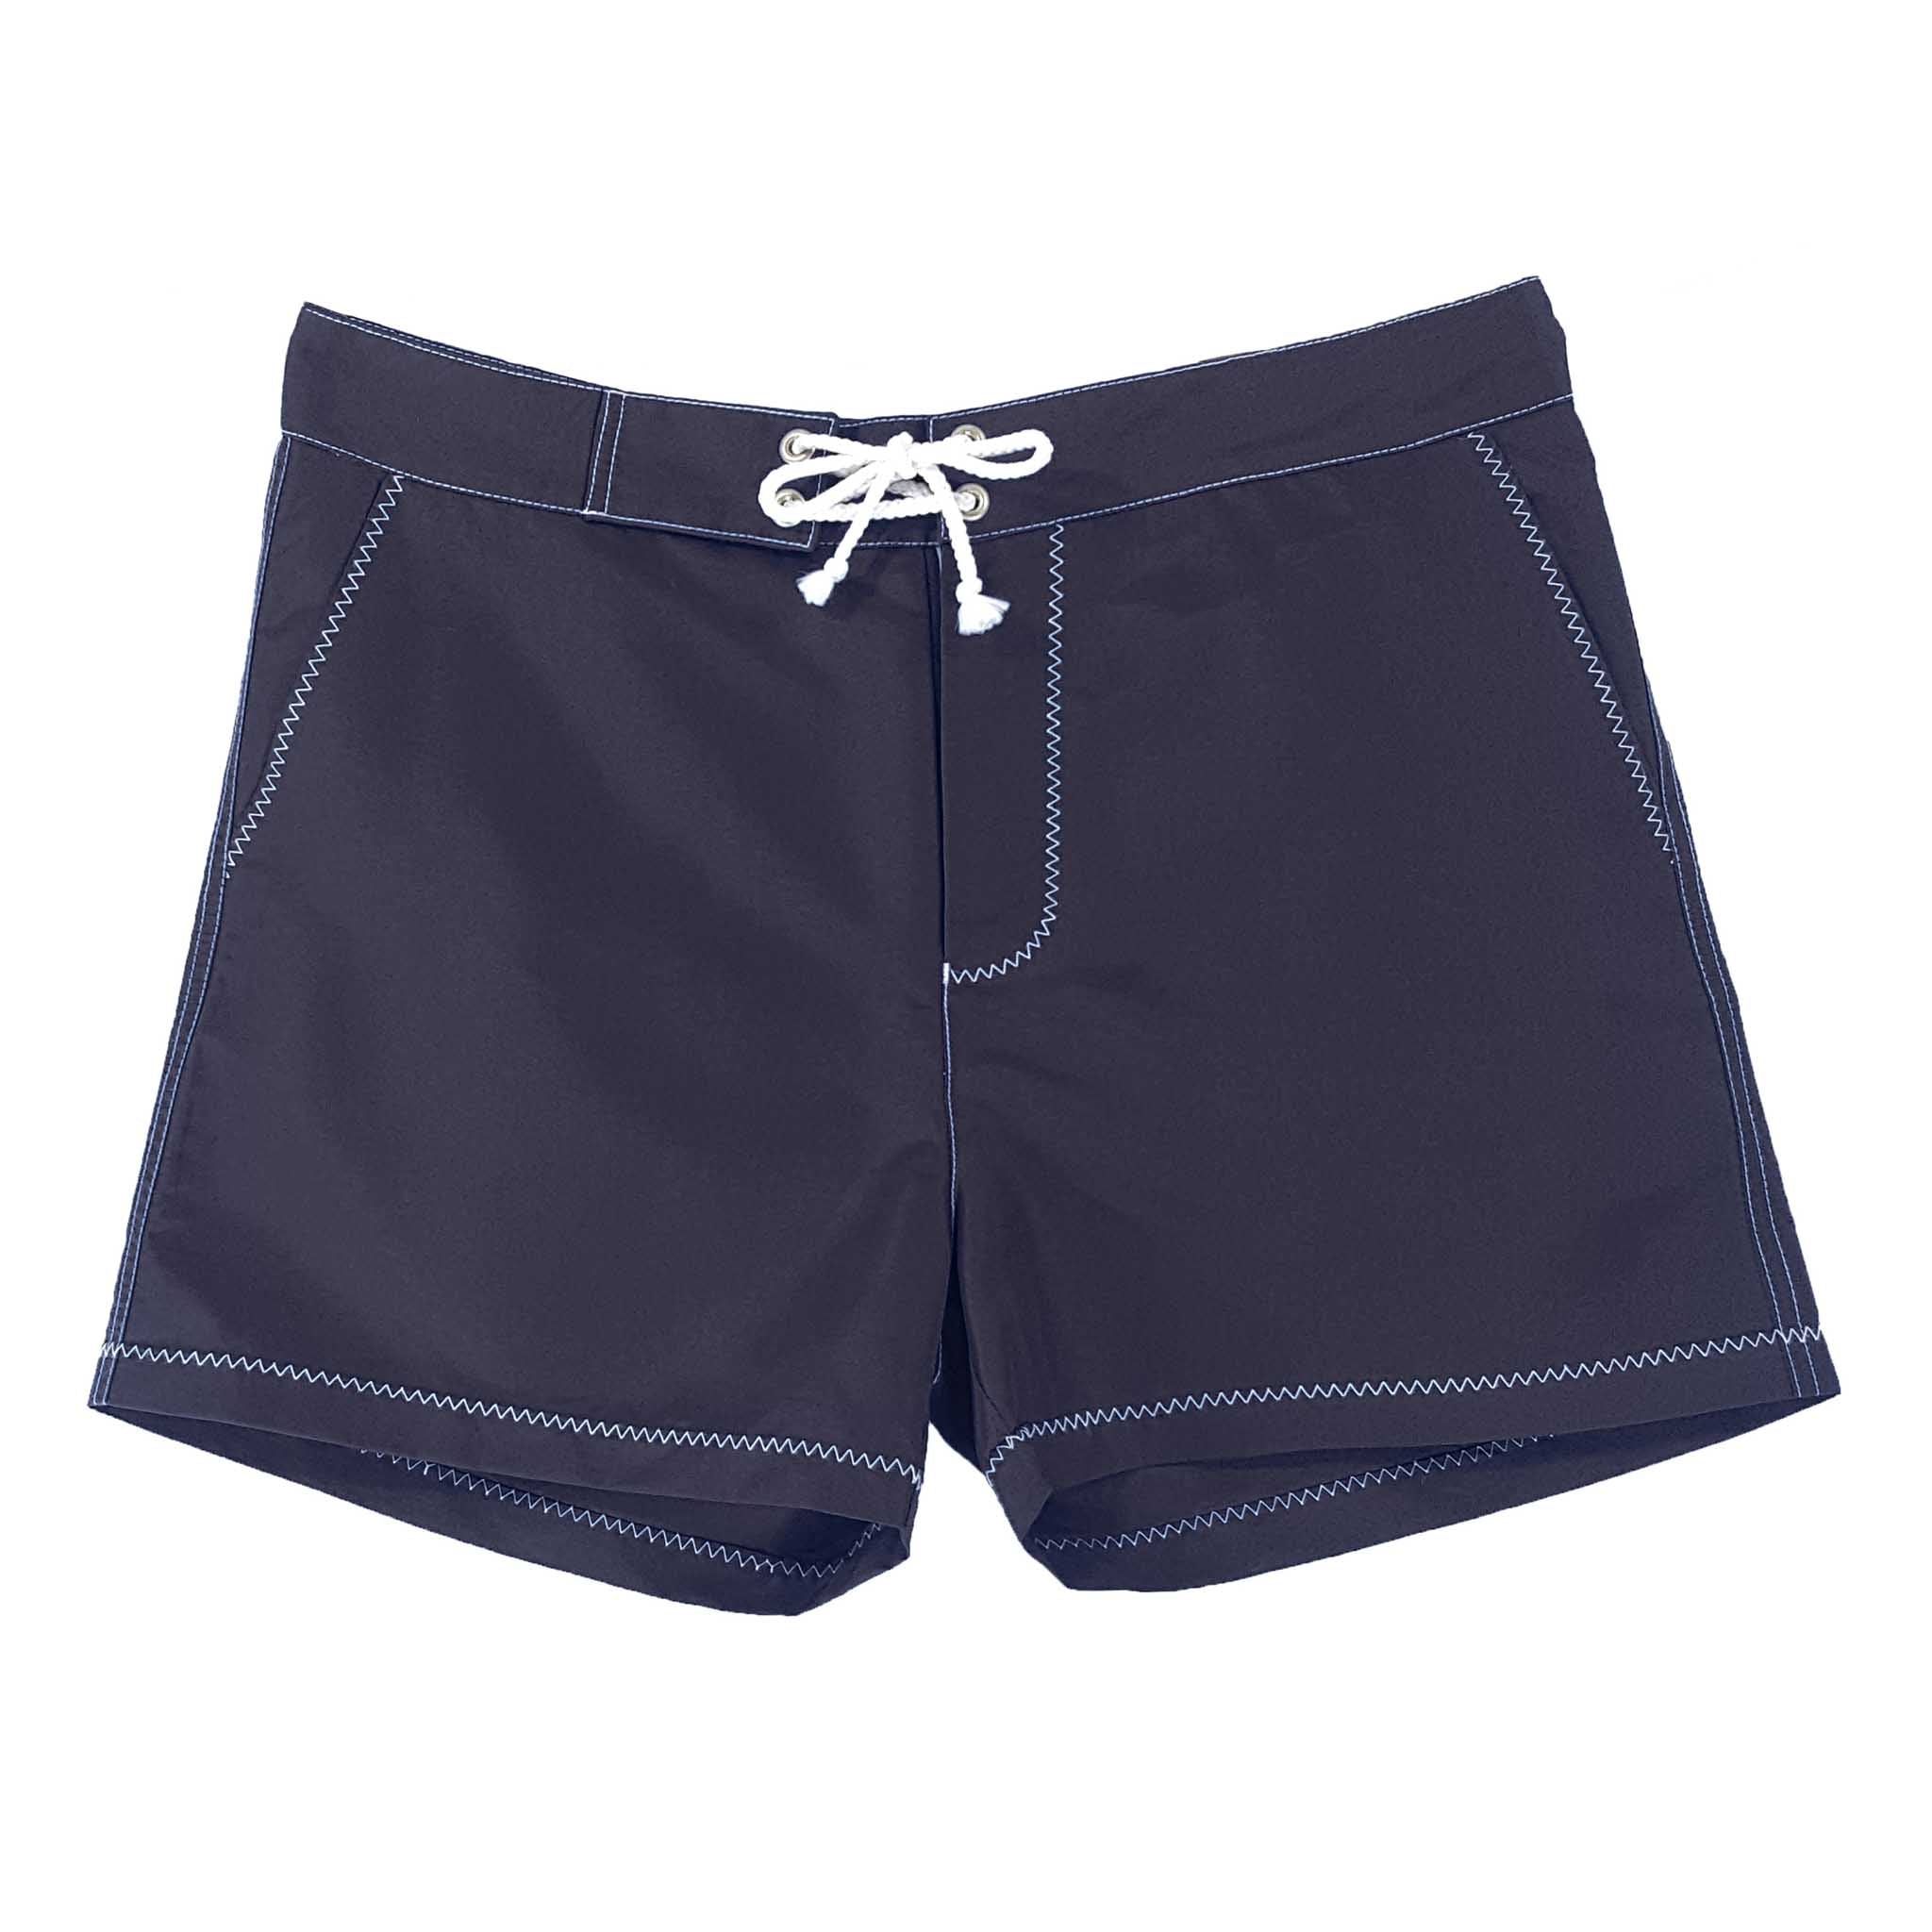 Dark blue swimming trunks made from recycled polyester from Bluebuck